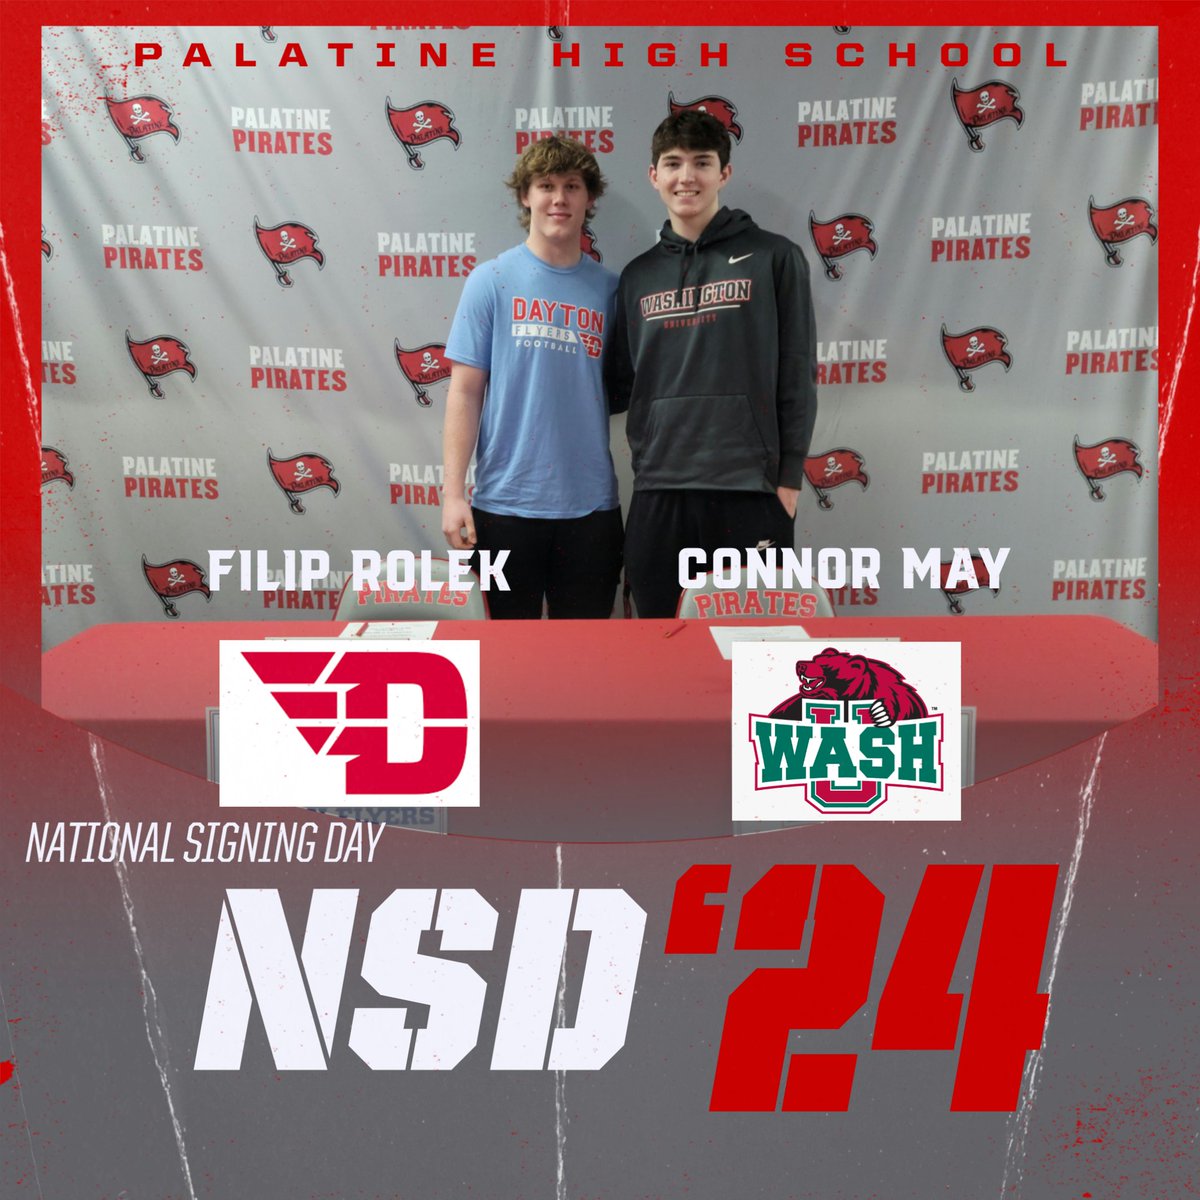 Congrats to Filip Rolek and Connor May as they commit to play at the next level. Filip will be playing football at the University of Dayton while Connor will be playing basketball at Washington University-St. Louis. Two athletes that have represented Palatine Athletics well!